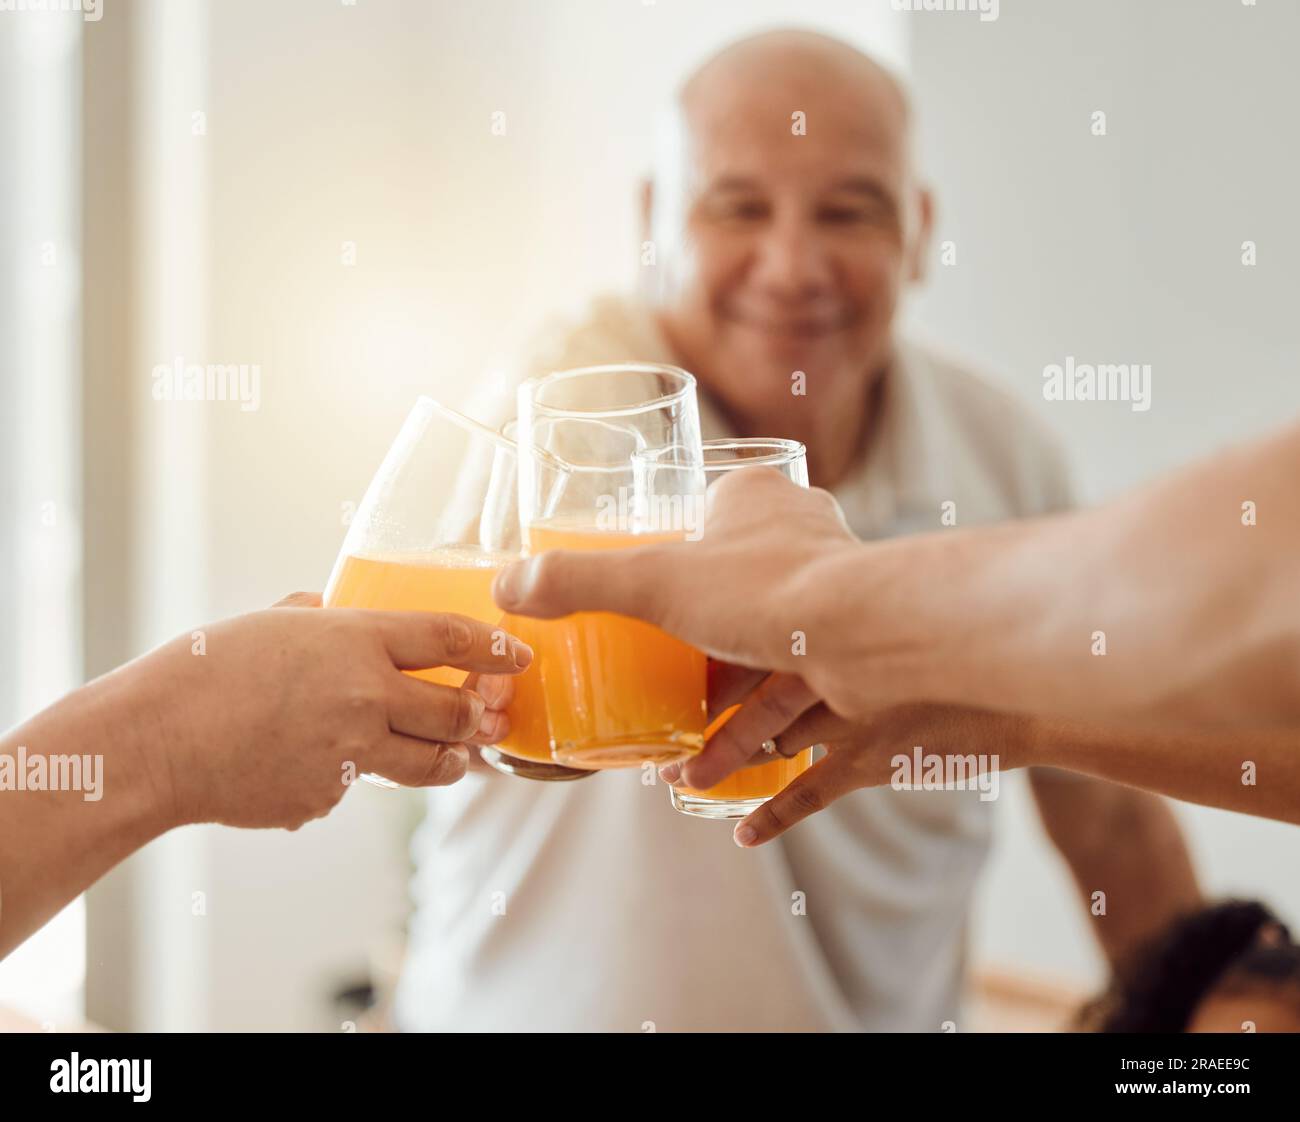 Celebration, senior happy man or toast with orange juice, beverage or glass drinks for fun friends reunion. Fruit liquid, retirement party group or Stock Photo